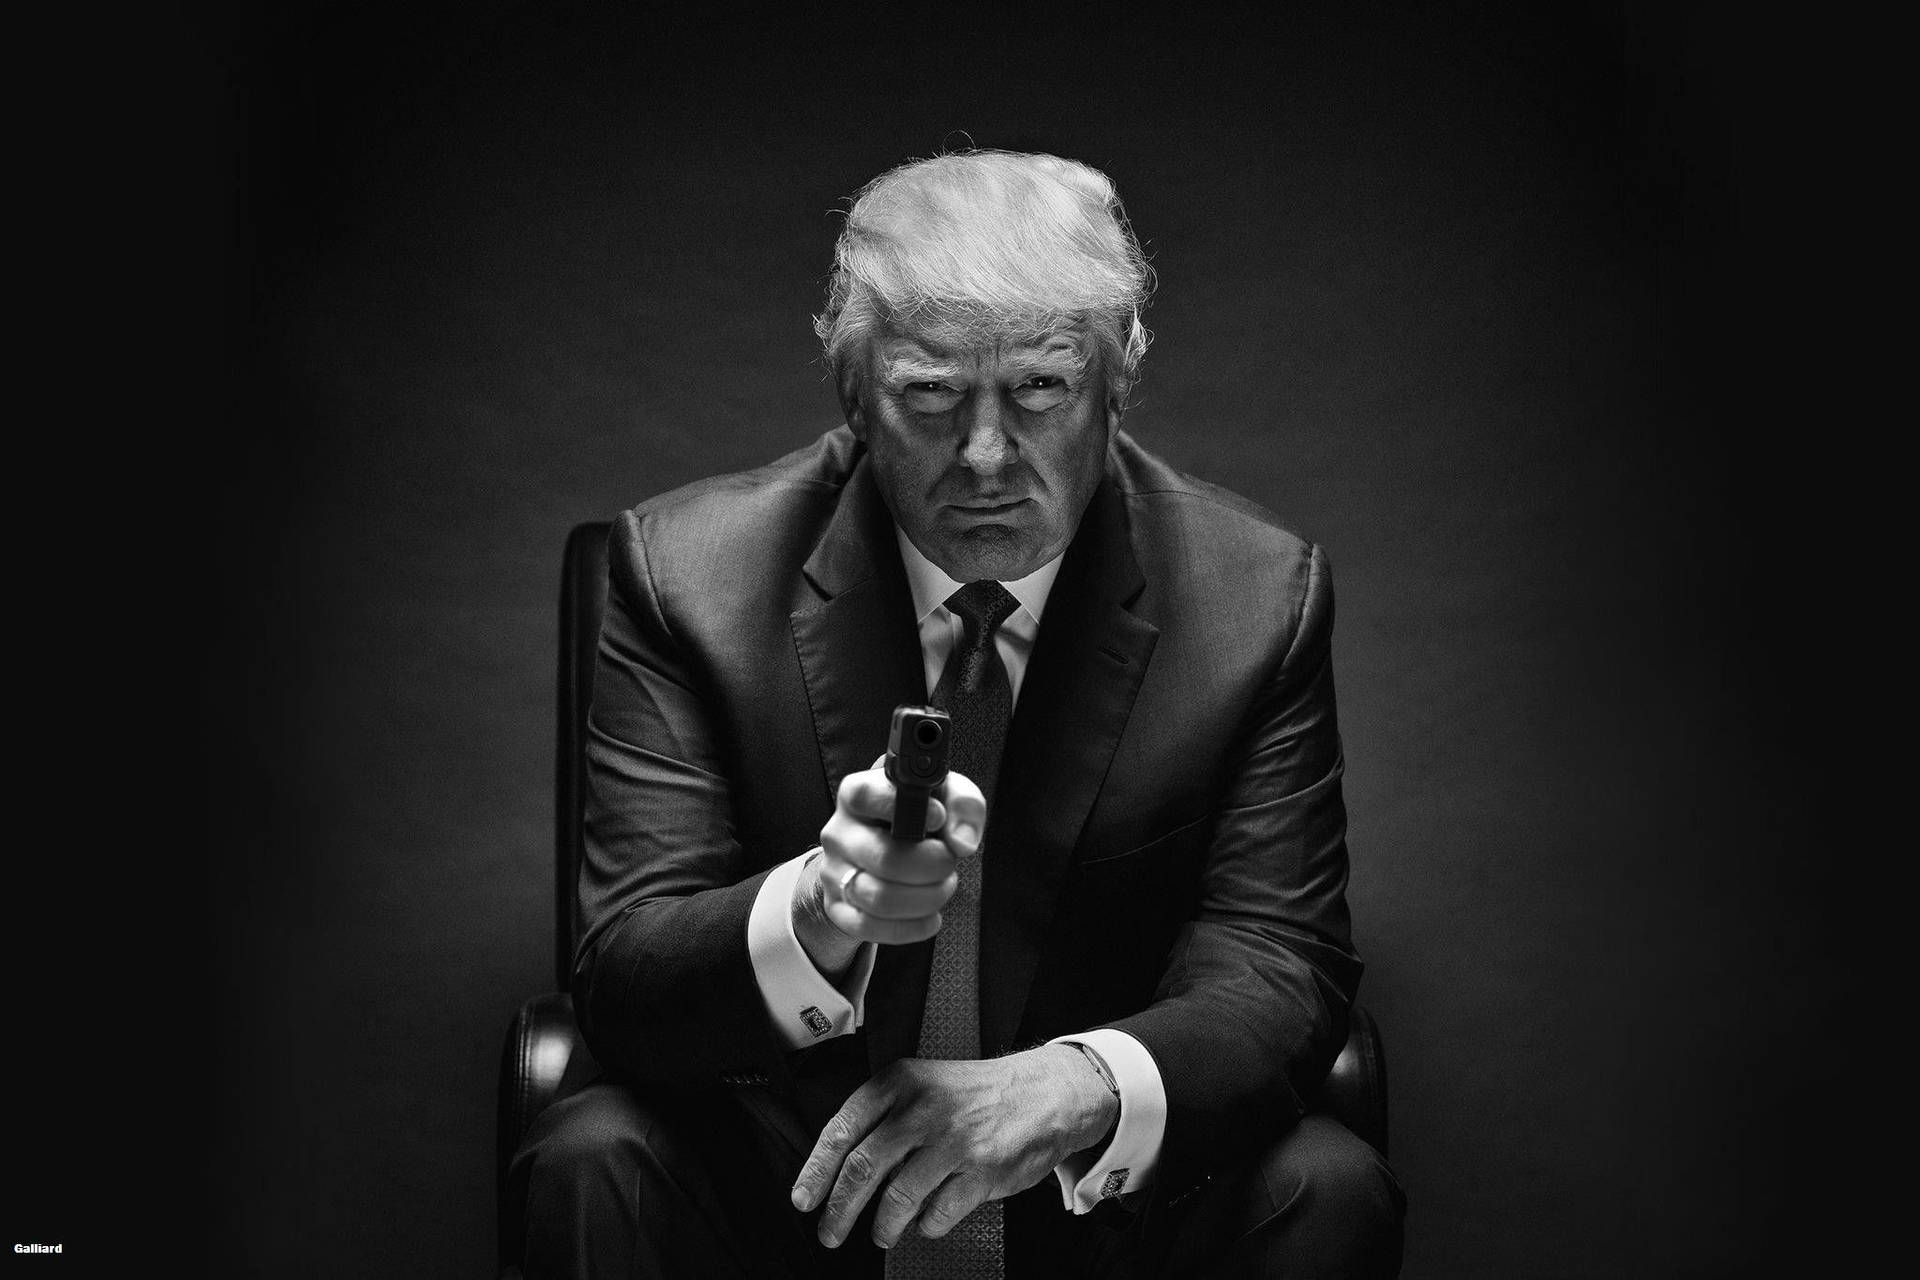 Donald Trump stands ready to take action Wallpaper